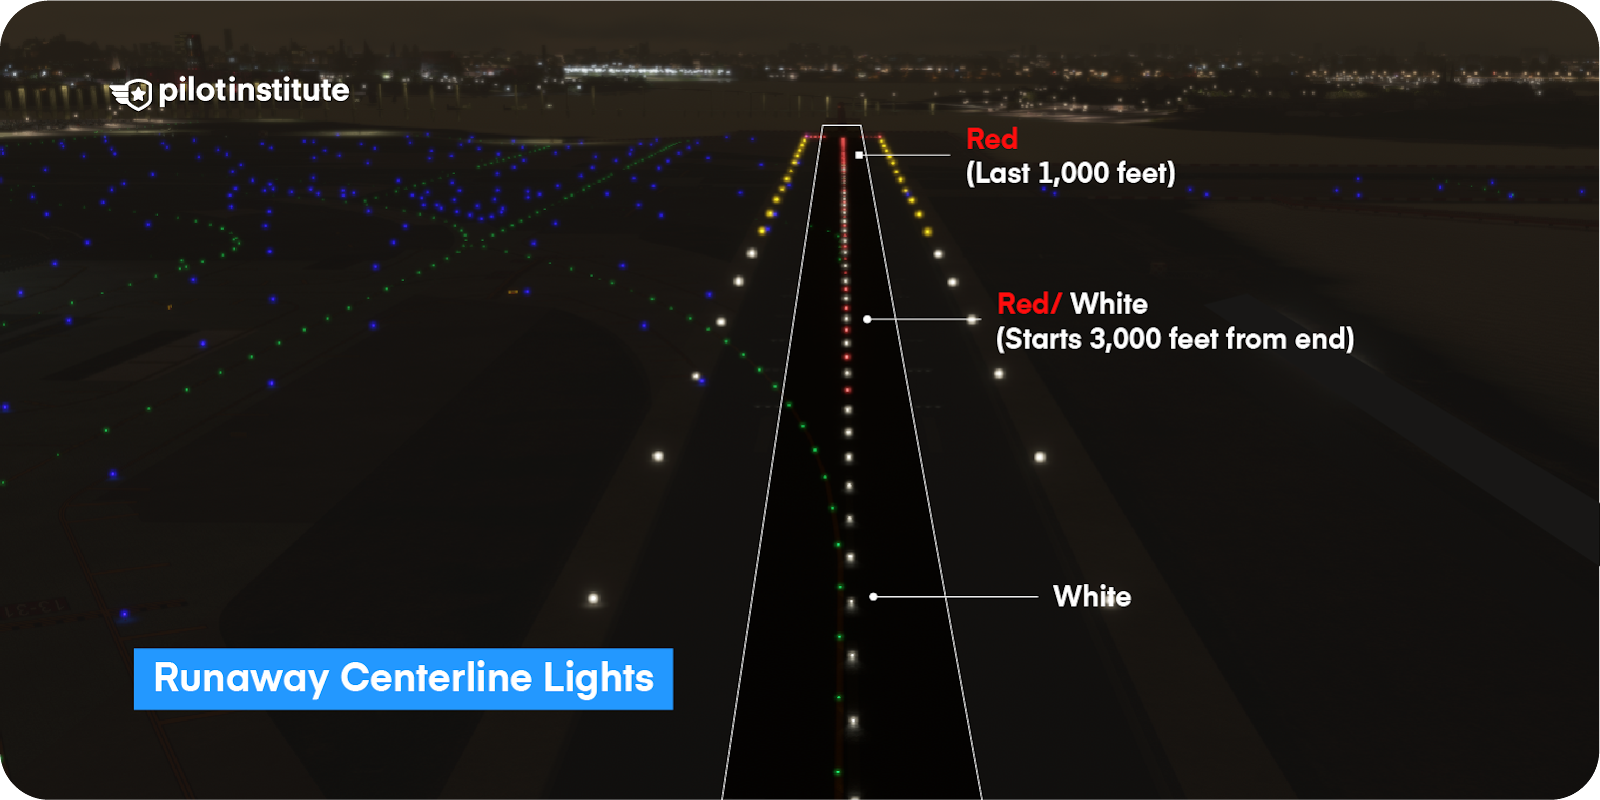 Runway centerline lights with white, red/white, and red segments highlighted.